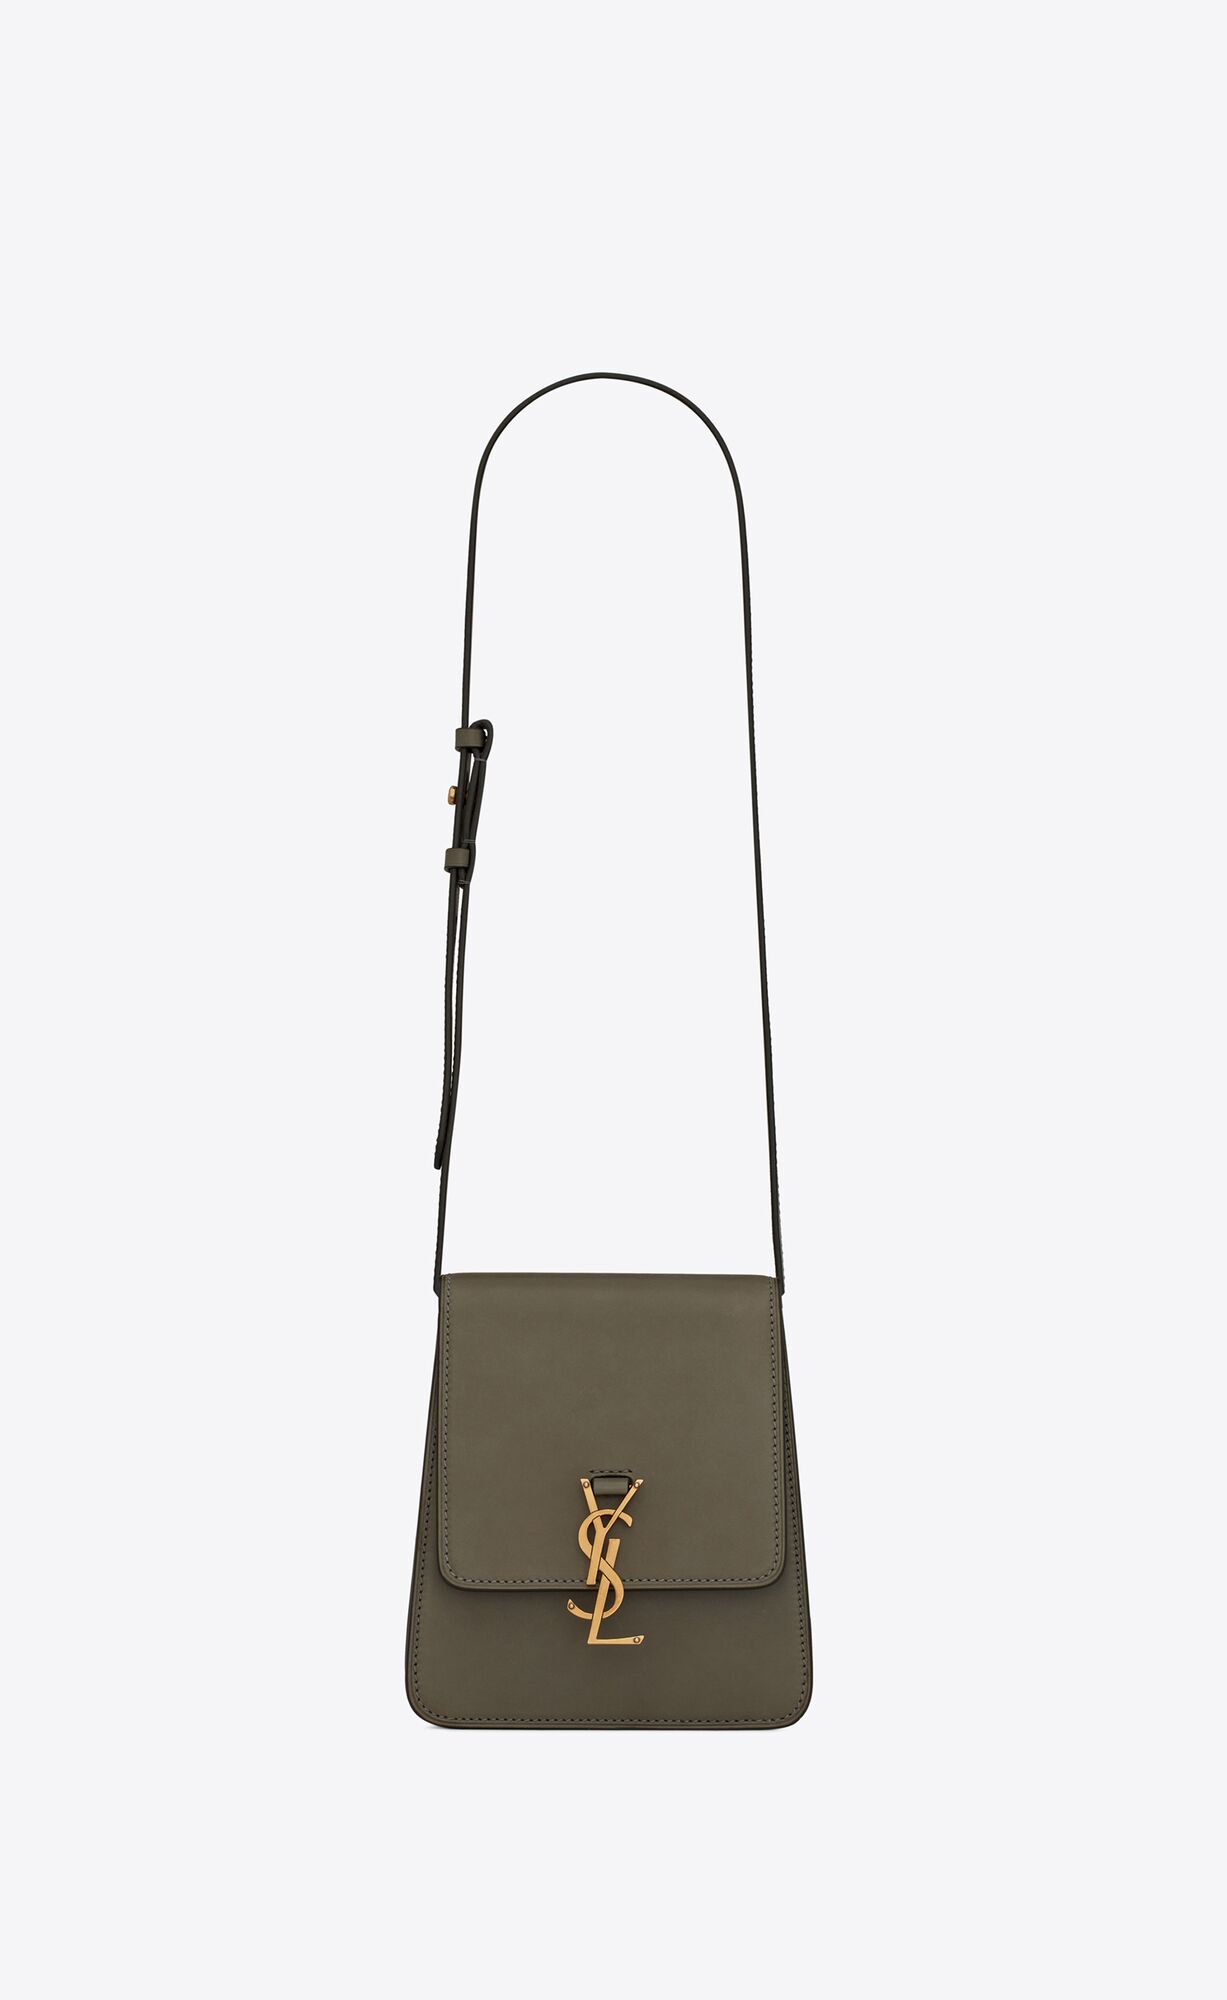 Saint Laurent Kaia North/south Satchel In Smooth Leather – Grey Khaki – 668809BWR0W1229